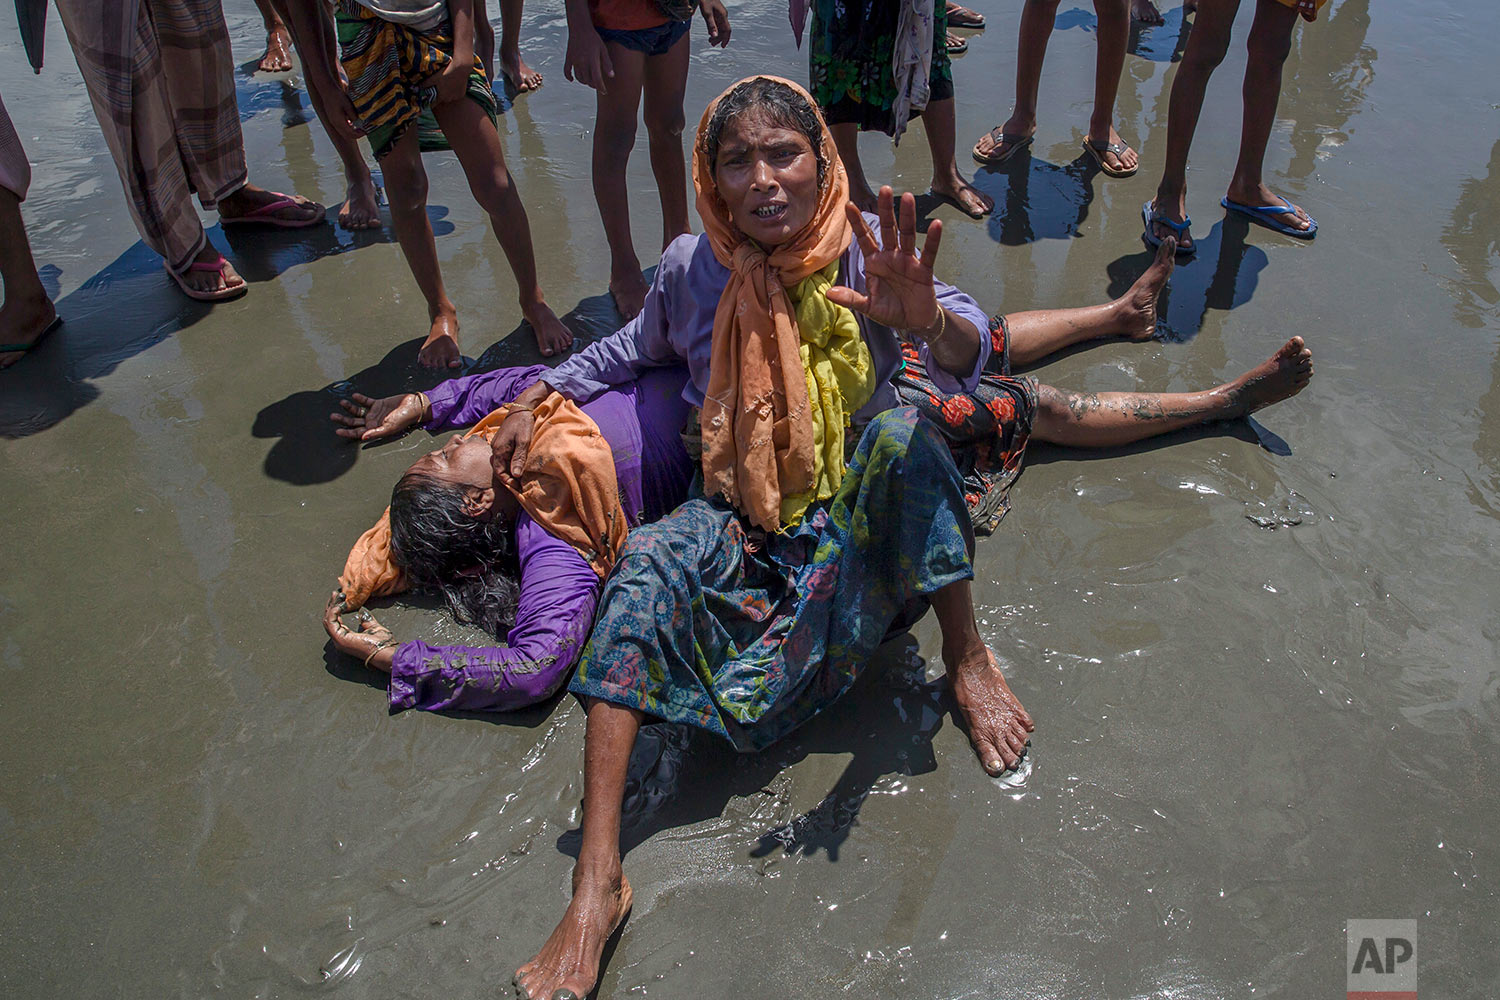 A Rohingya Muslim woman, who crossed over from Myanmar into Bangladesh, shouts for help as a relative lies unconscious after the boat they were traveling in capsized minutes before reaching shore at Shah Porir Dwip, Bangladesh, Thursday, Sept. 14, 2017.  (AP Photo/Dar Yasin)